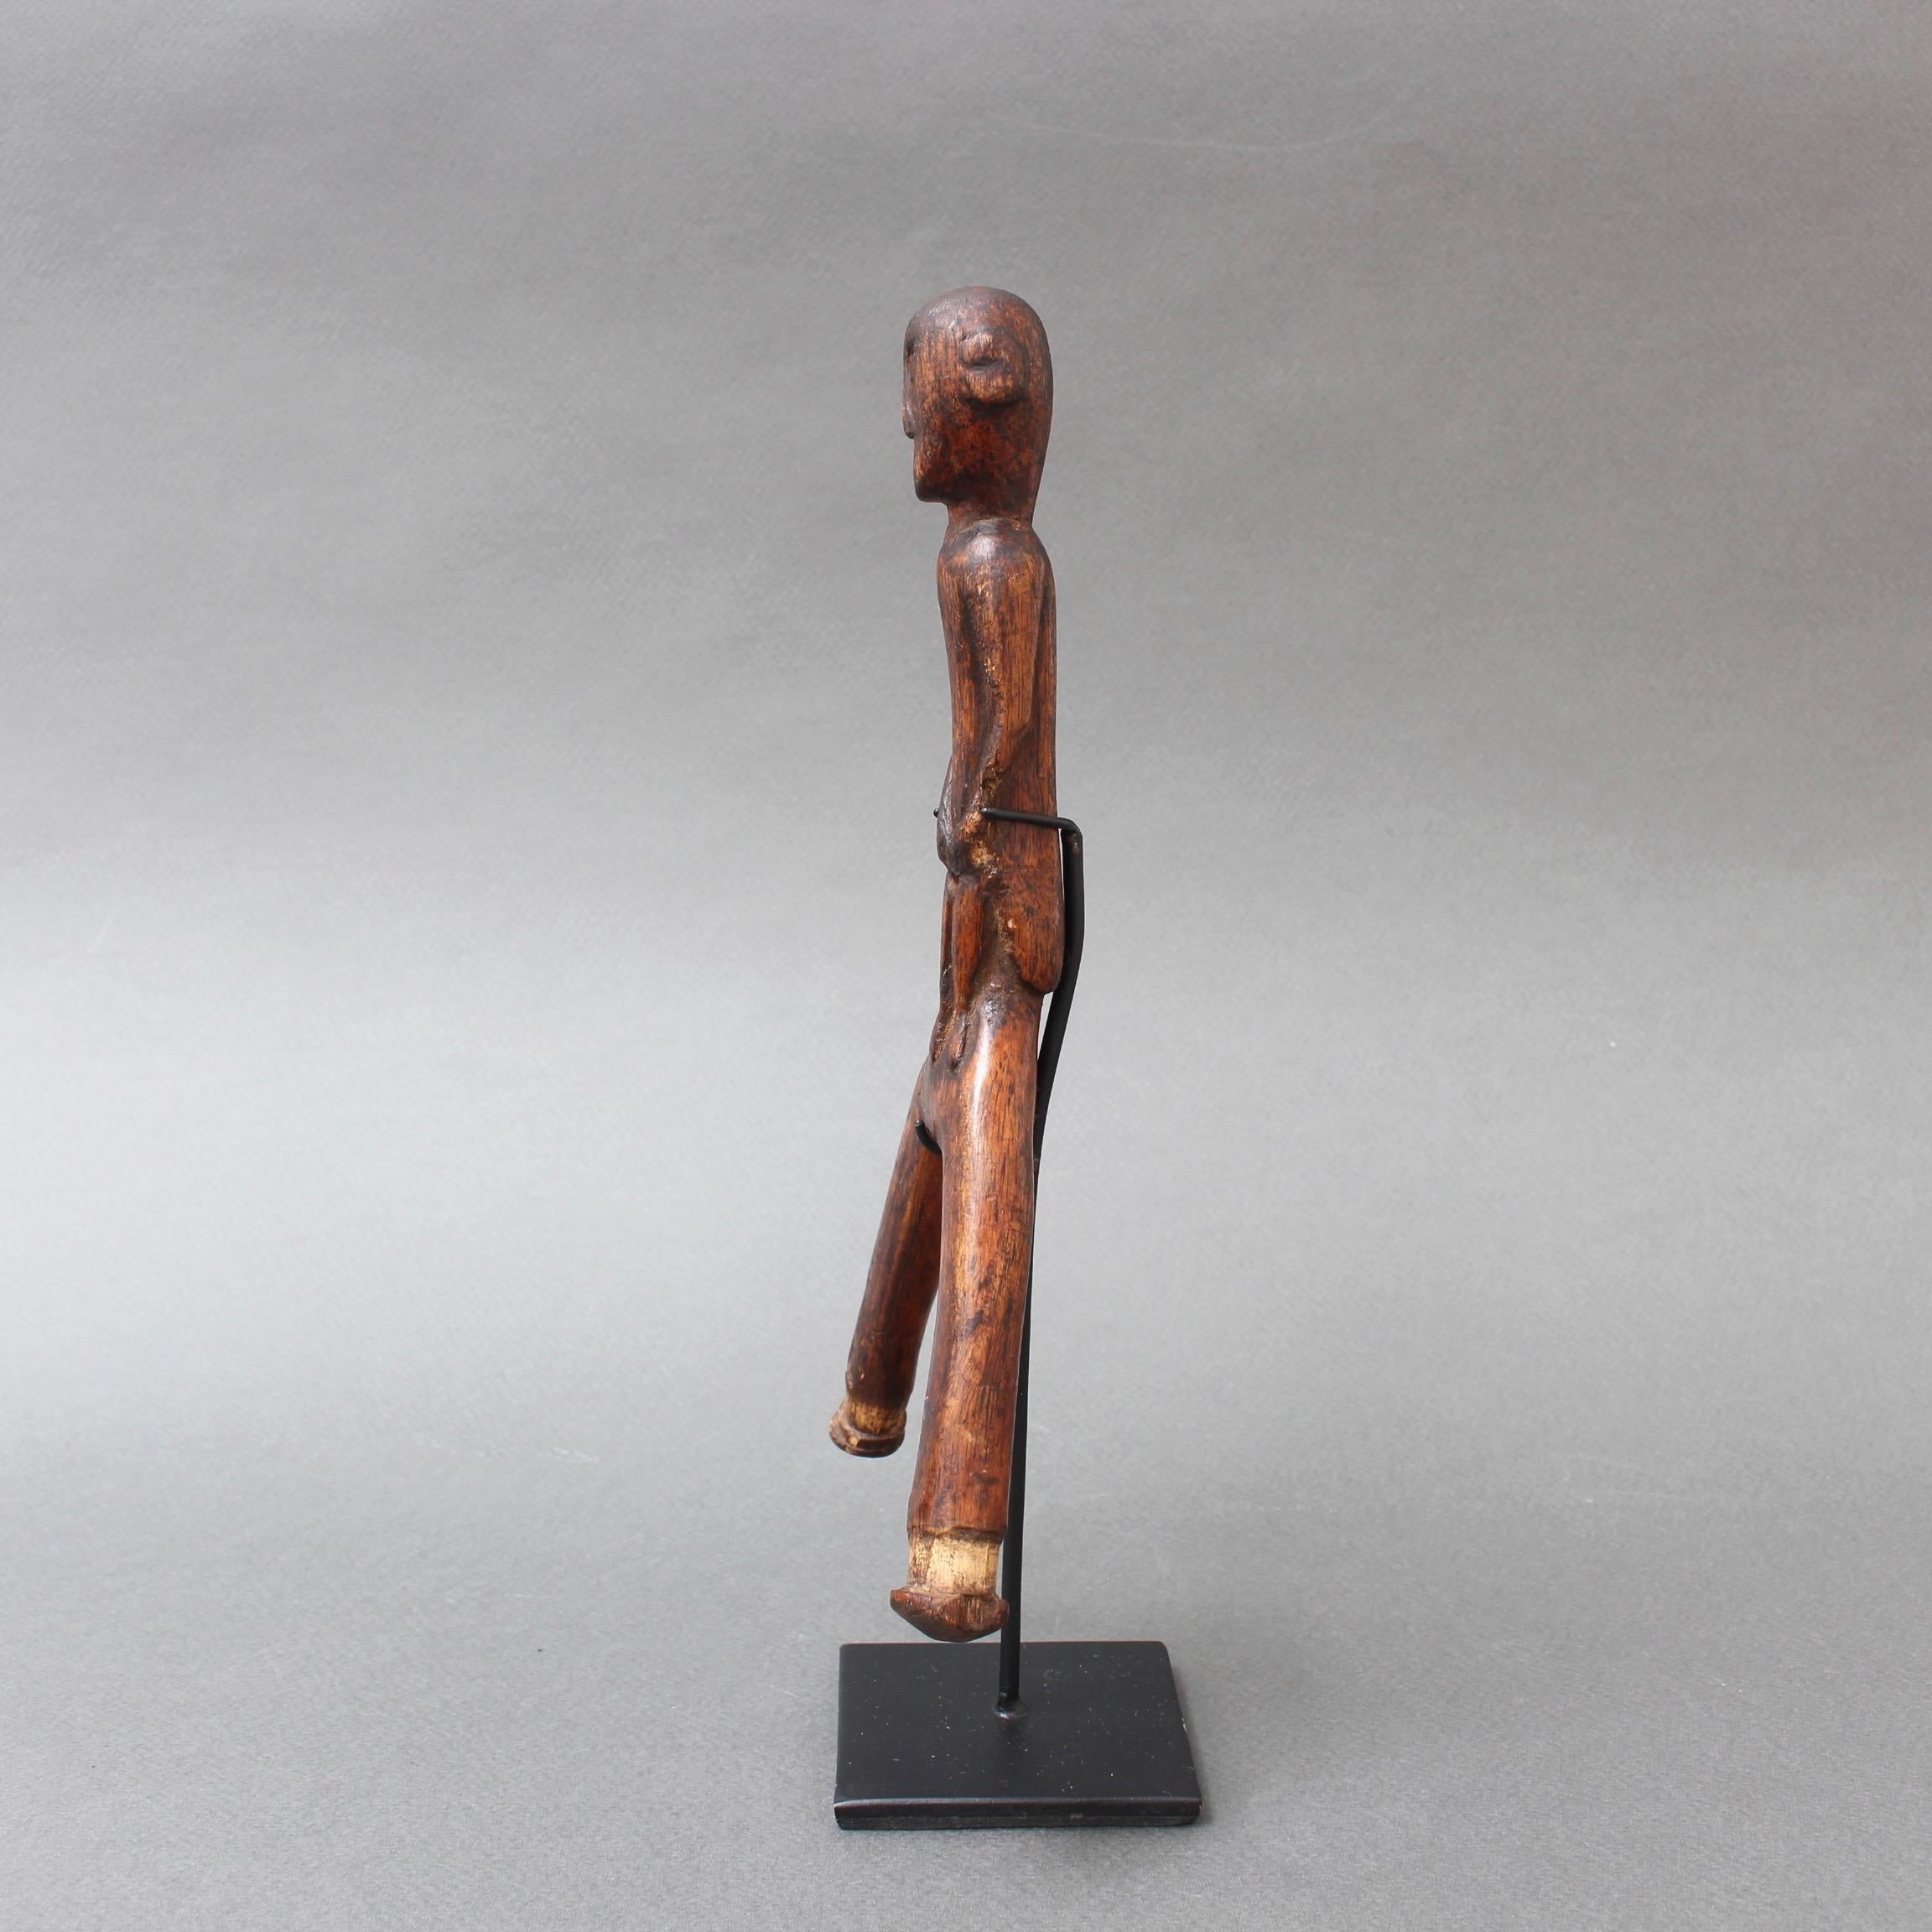 Indonesian Carved Wooden Slingshot Figure from Timor Island, Indonesia, circa 1970s